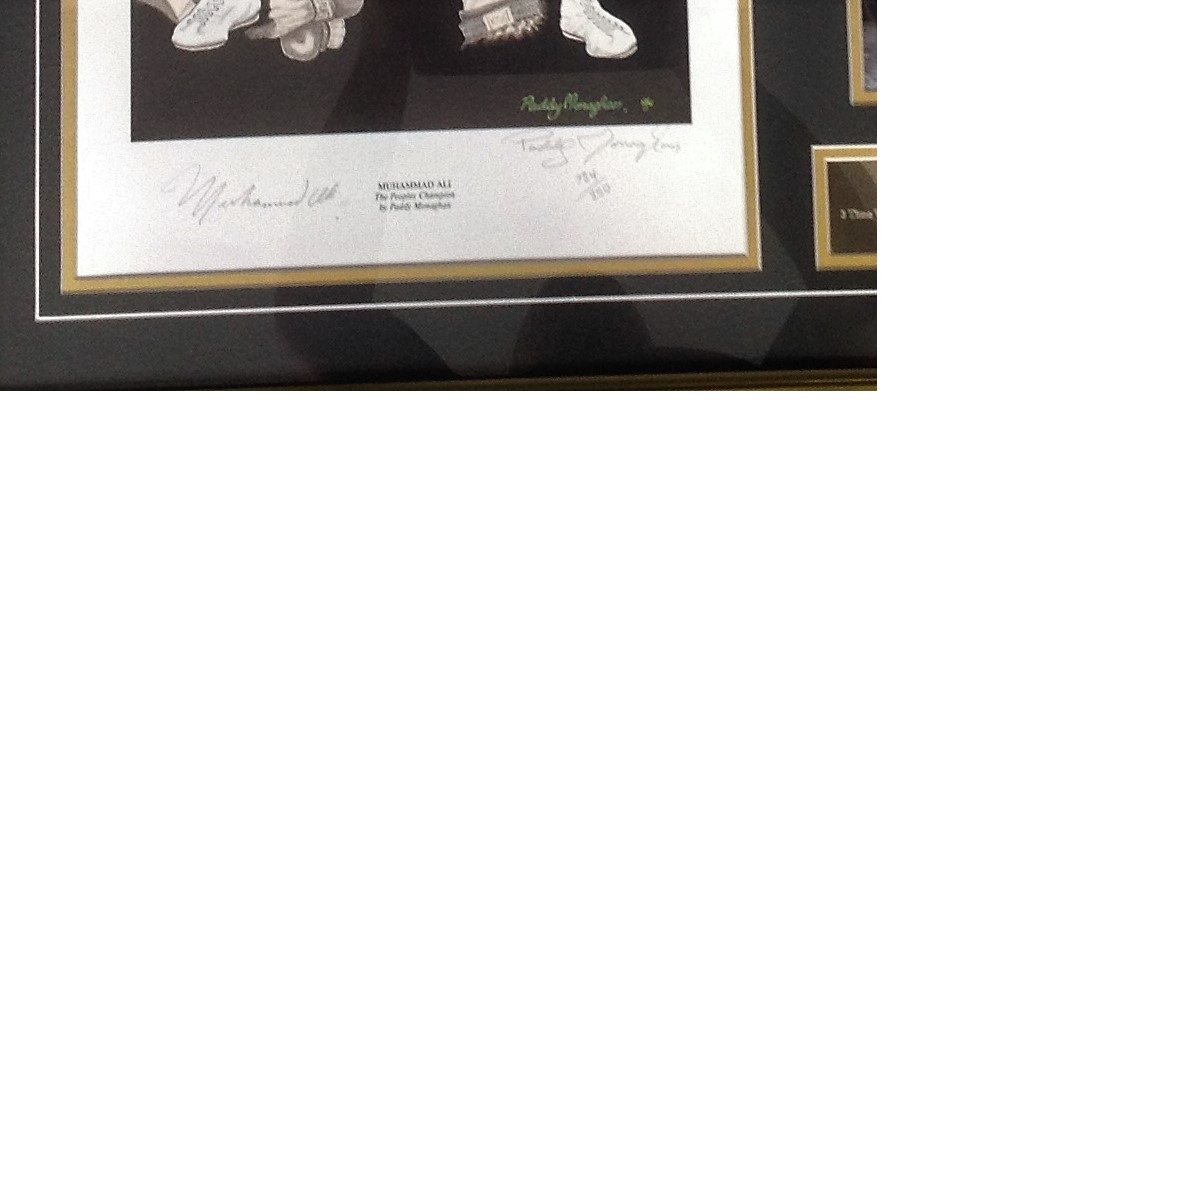 Boxing Muhammad Ali 30x29 mounted and framed print signed in pencil by the Greatest and the artist - Image 2 of 2